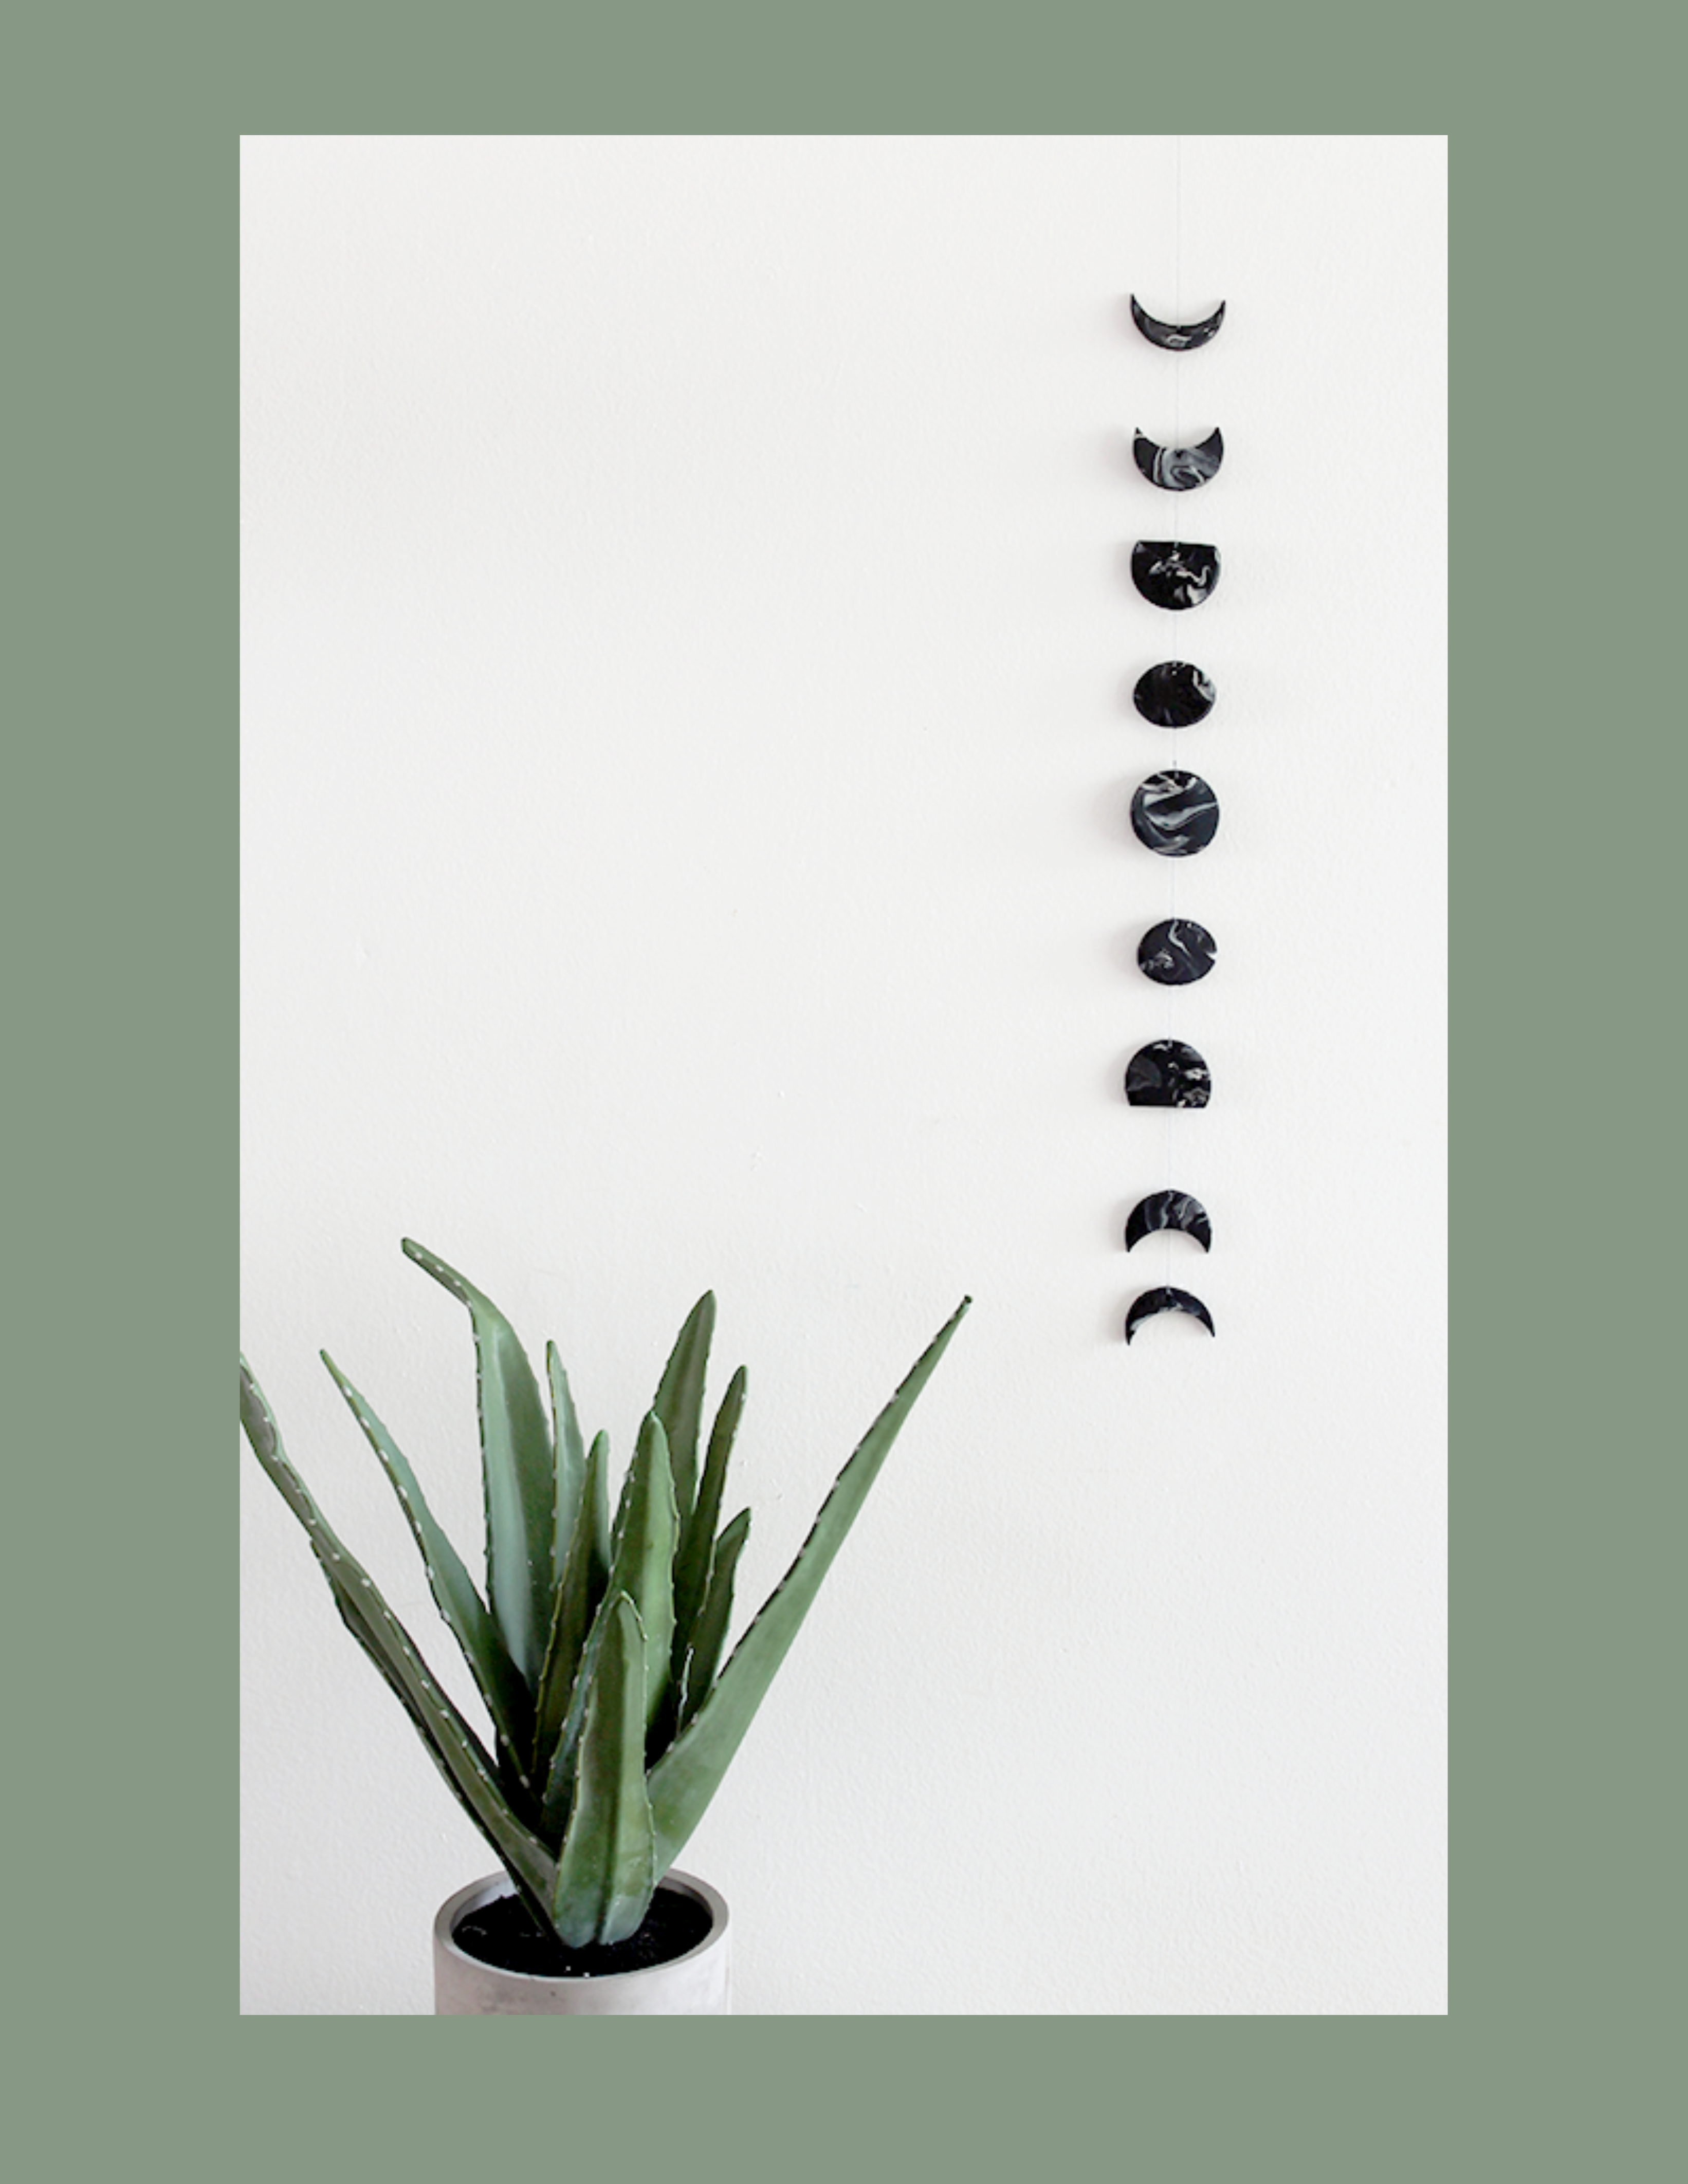 Moon phase hanging art in black against a white background with green plant in pot on the left side. 